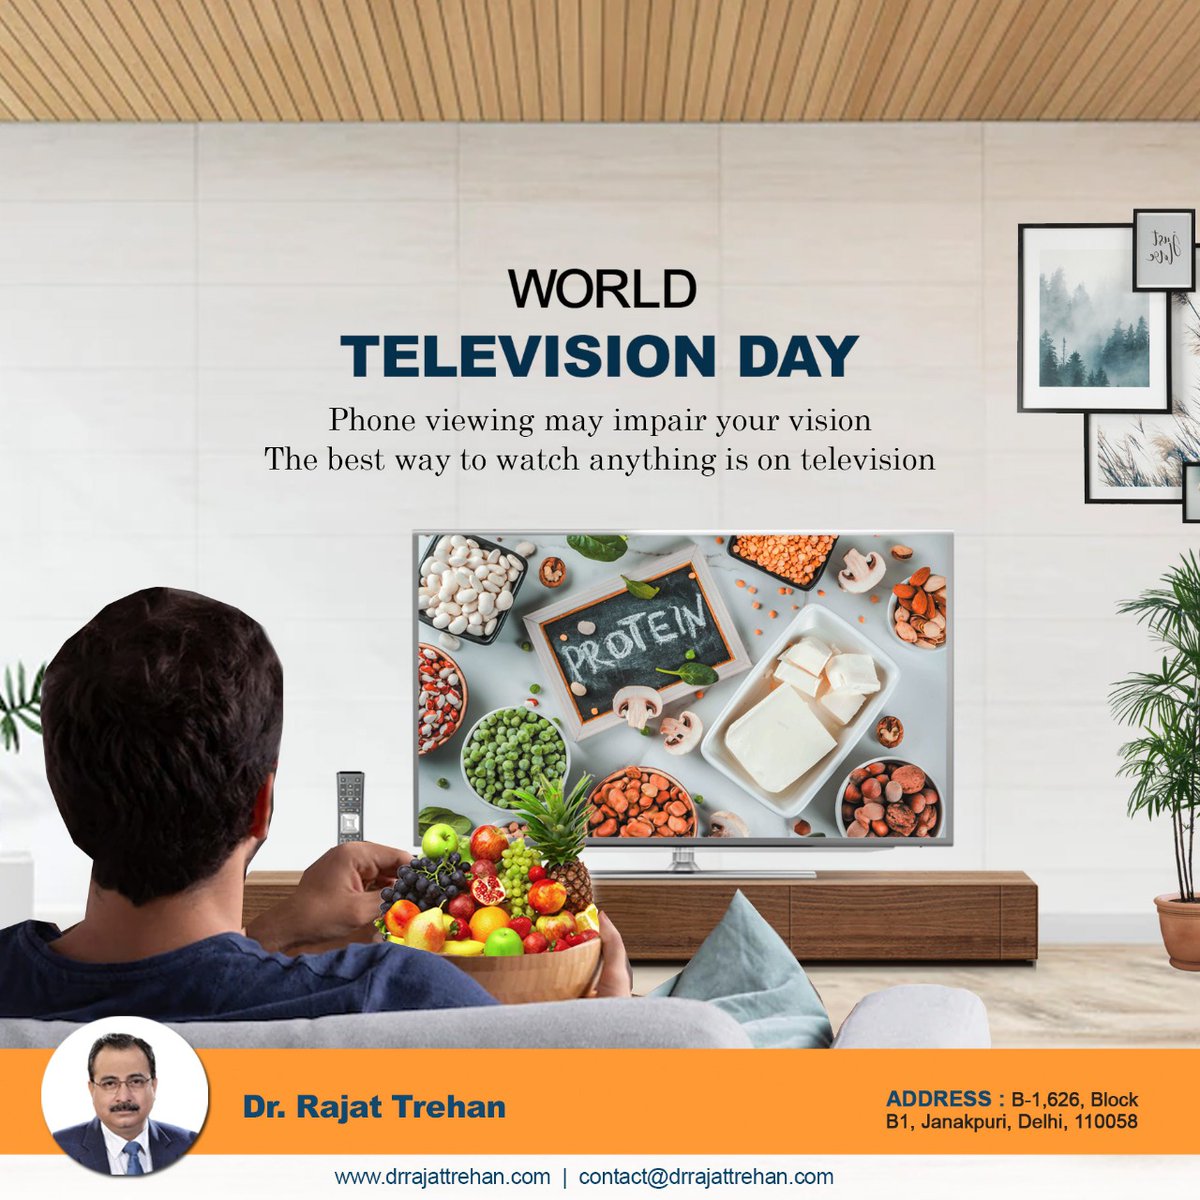 Phone viewing may impair your vision. The best way to watch anything is on television. World television day.

#healthydiet #healthyindiandiet #diet #dietist #watchingtv #tvwatching #healthybody #healthybodyhealthymind #healthymindhealthybody #bodyhealthy #daytimetelevision